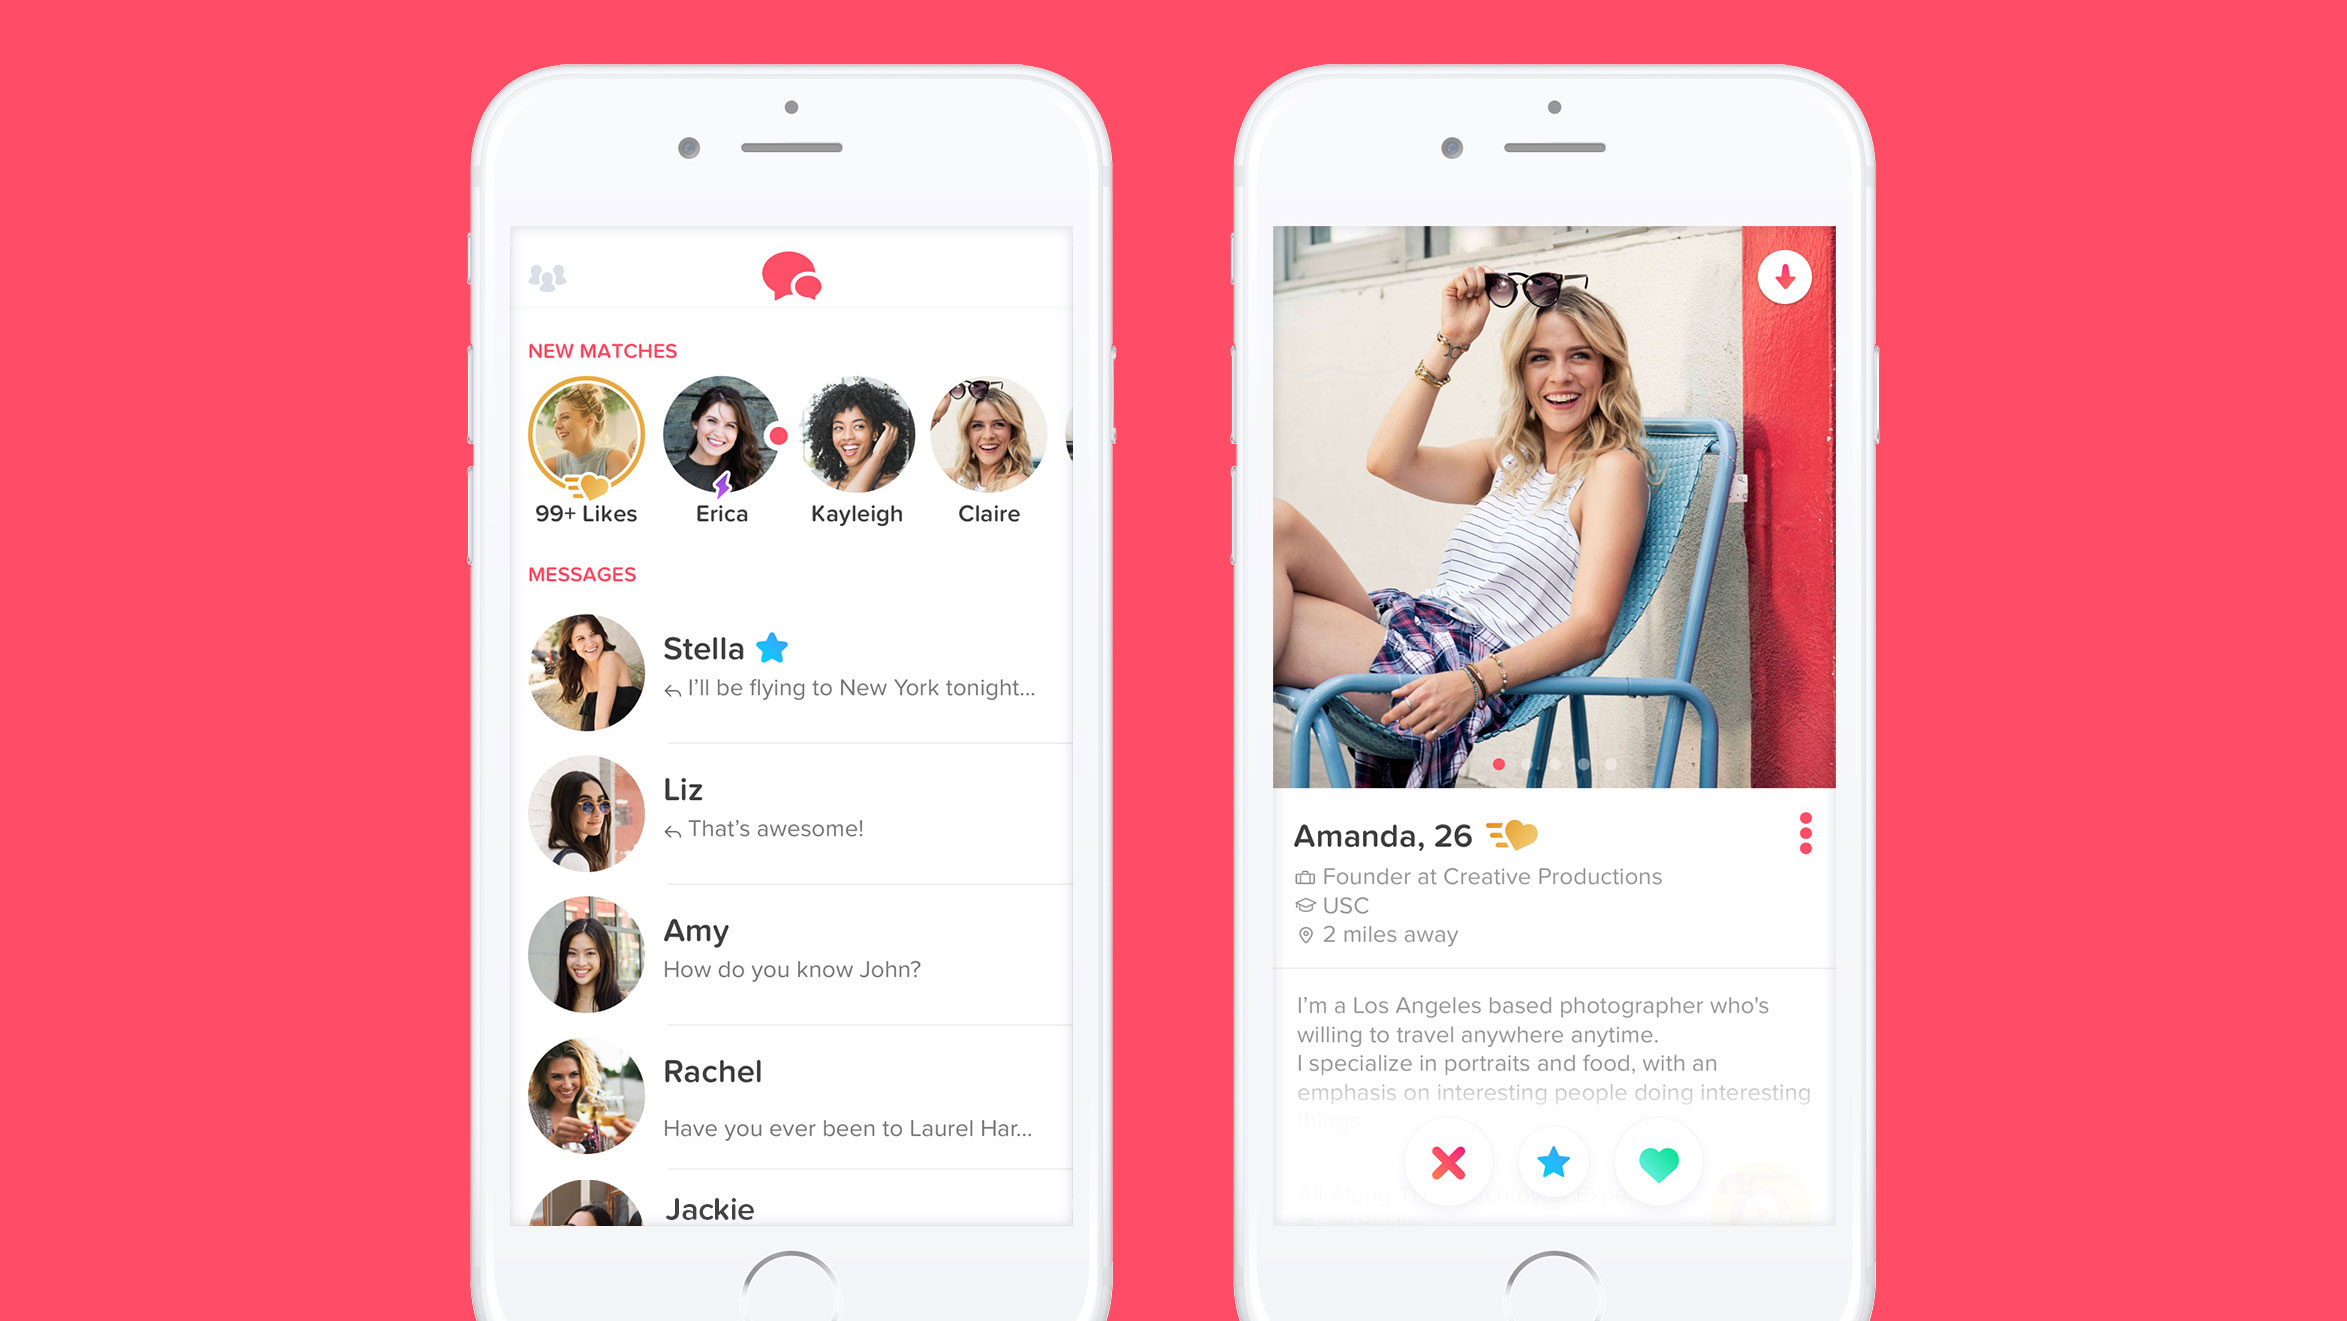 This Tinder Hack Will Improve Your Odds Of Finding Love